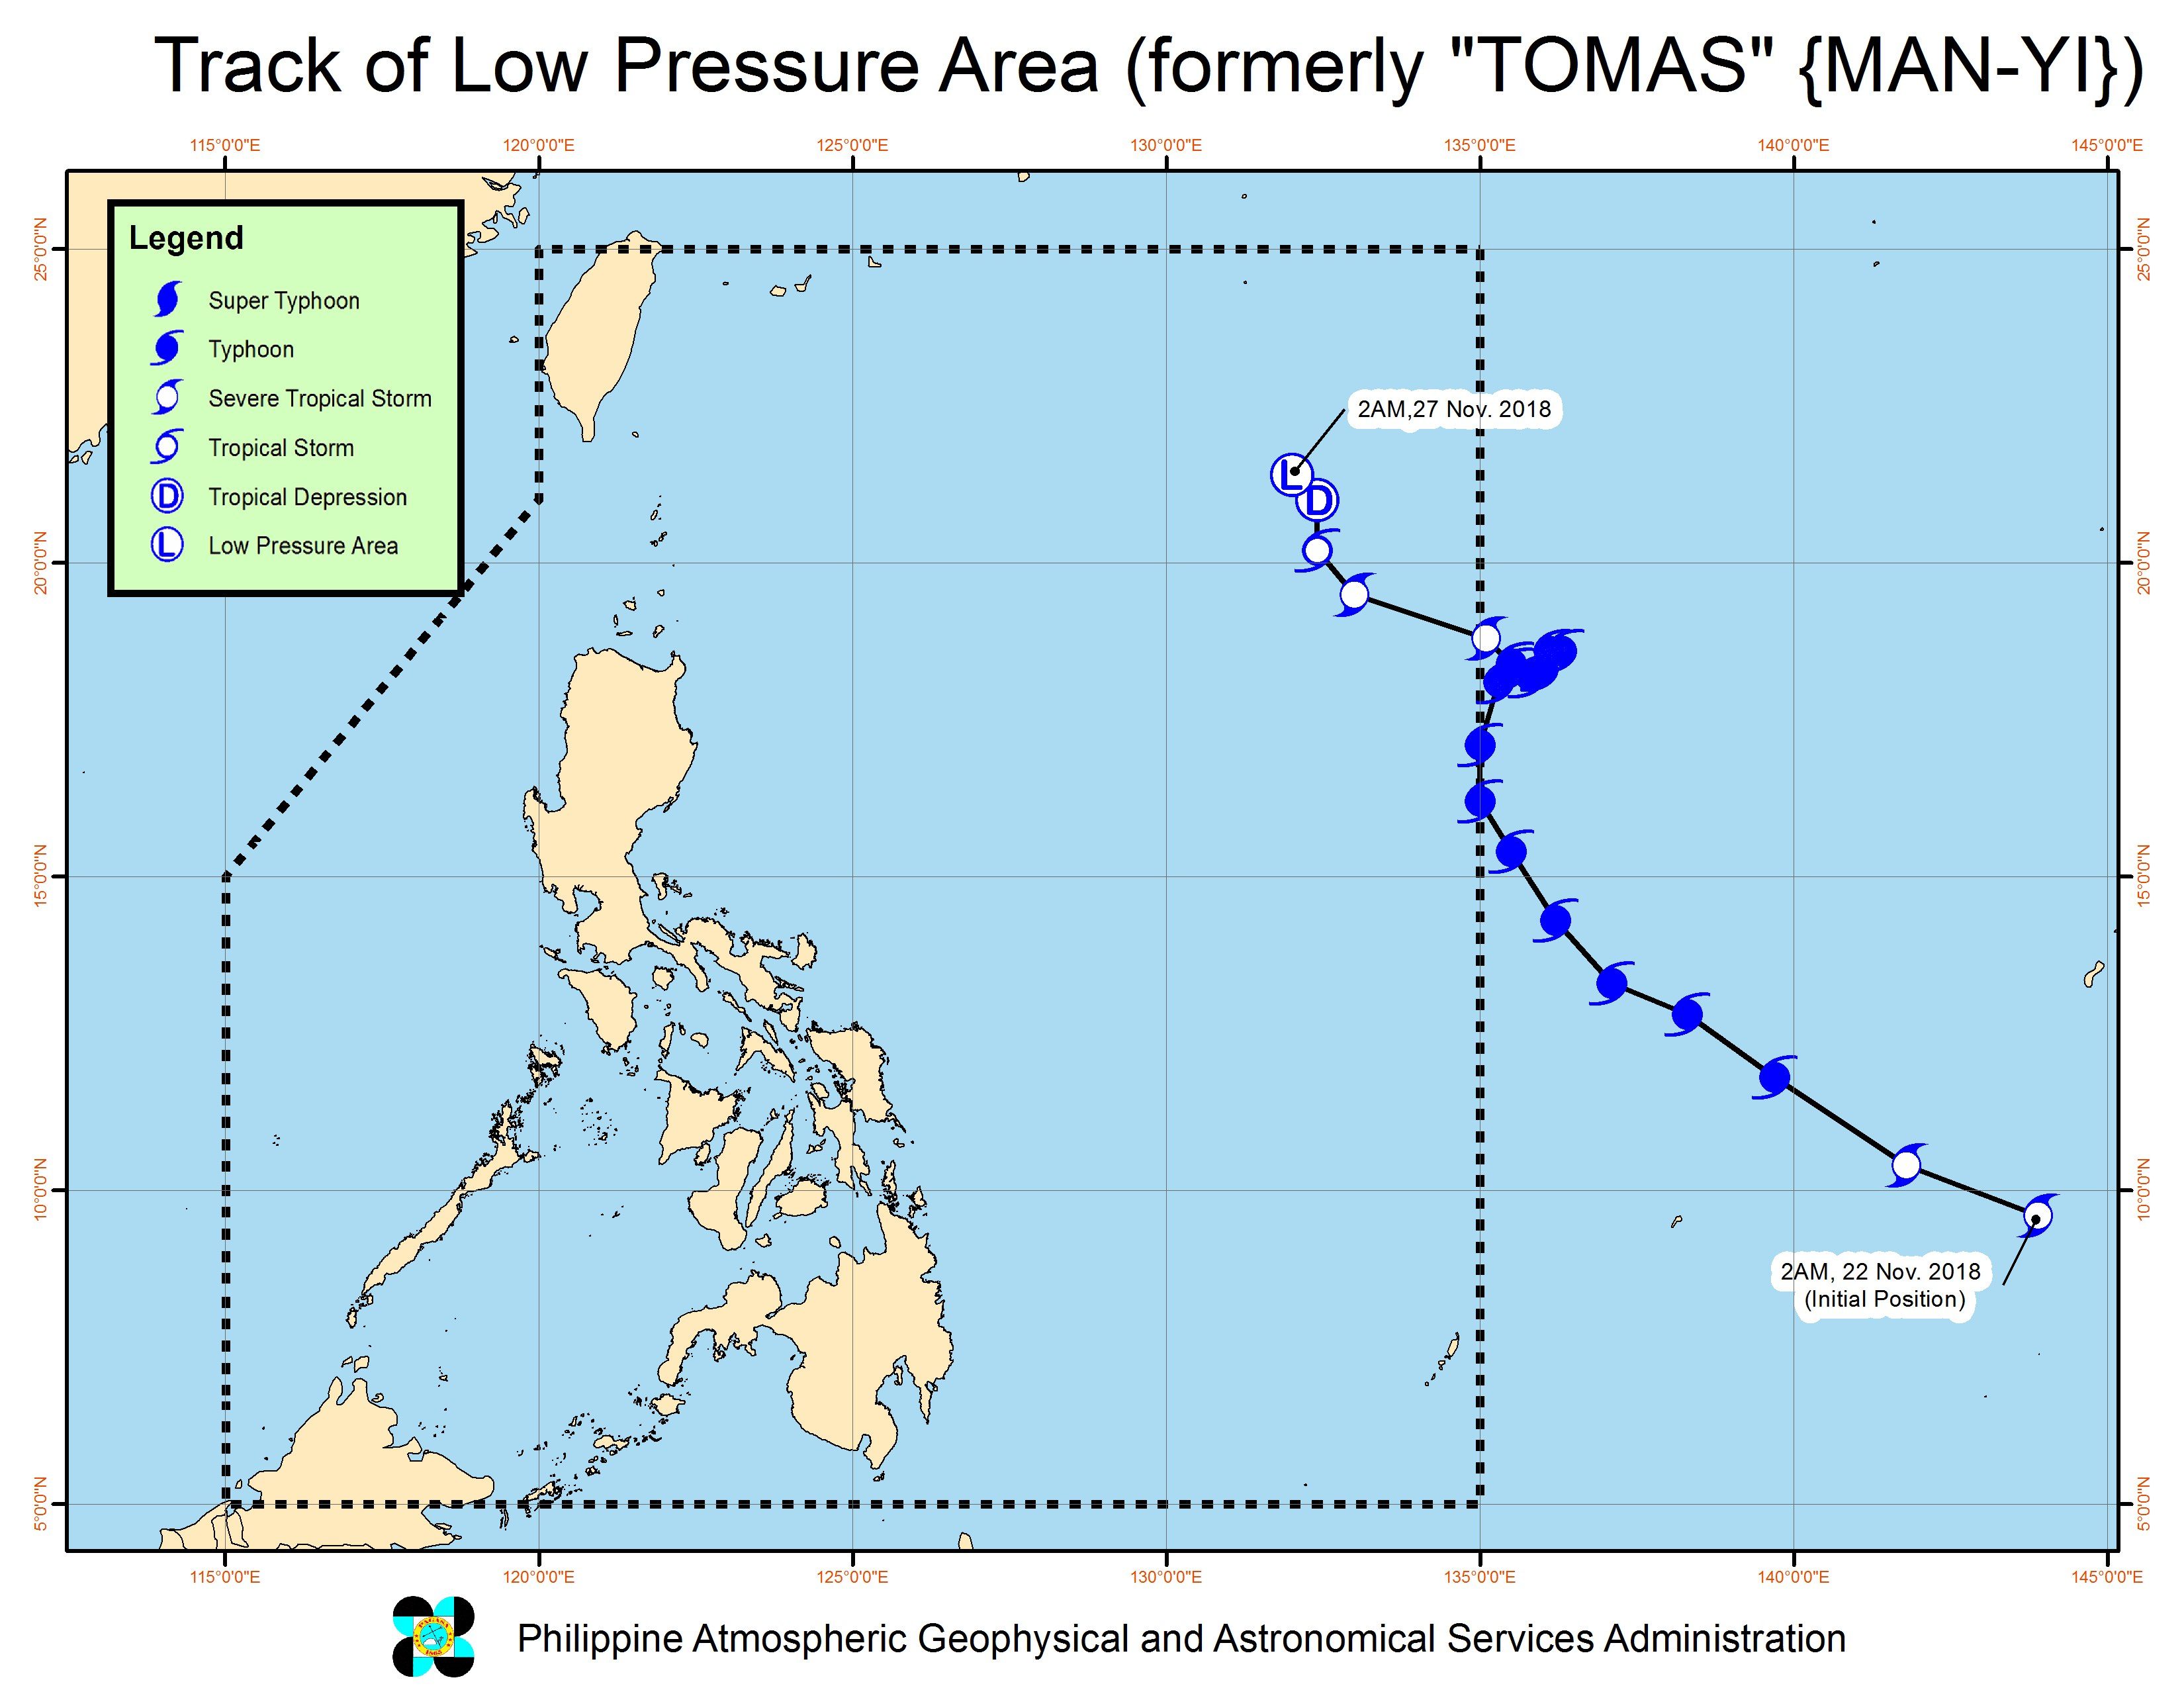 Forecast track of the low pressure area which used to be Tomas (Man-yi), as of November 27, 2018, 5 am. Image from PAGASA 